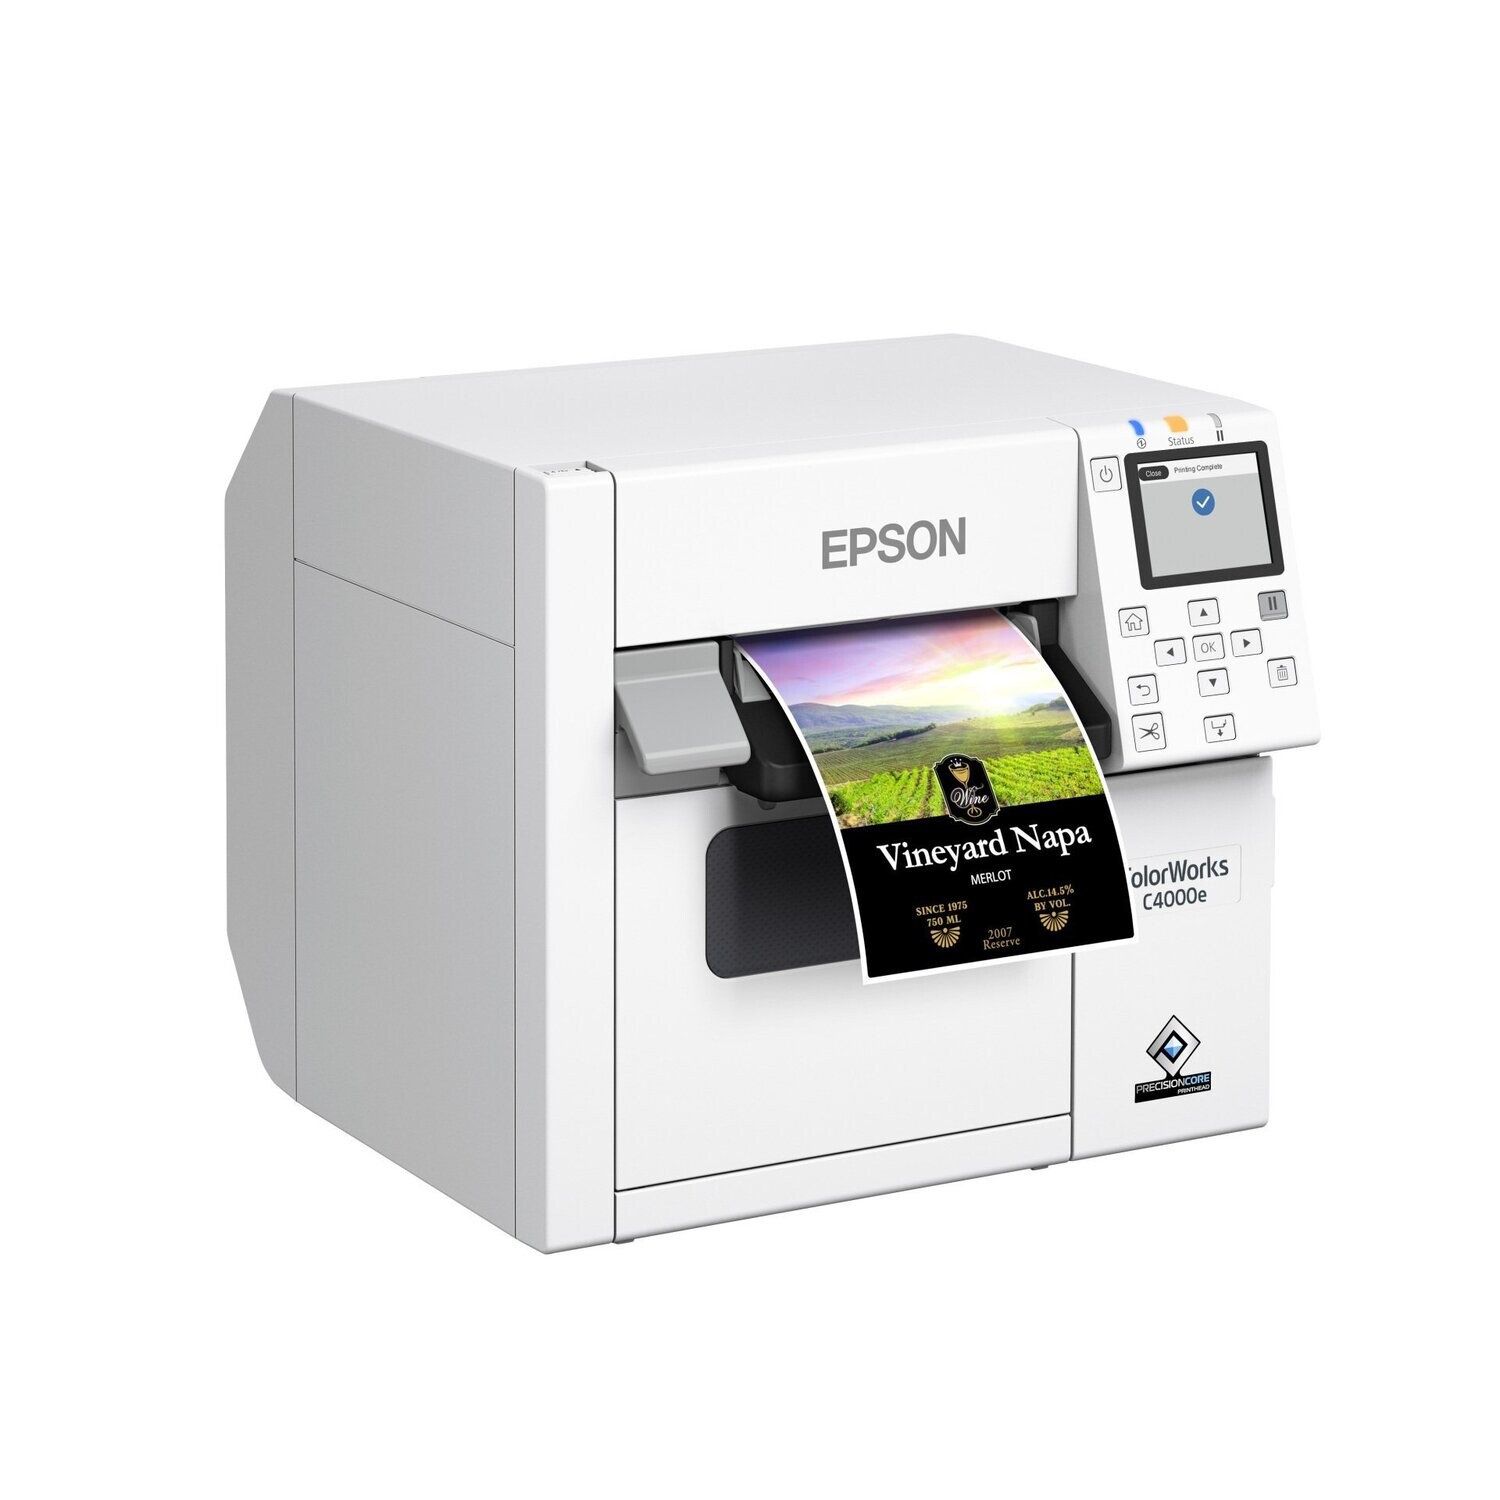 Epson ColorWorks CW-C4000e(mk) inkjet colour label printer - high depth  matt inks for greater depth black - vivid full colour labels direct from  your computer. ordered on request